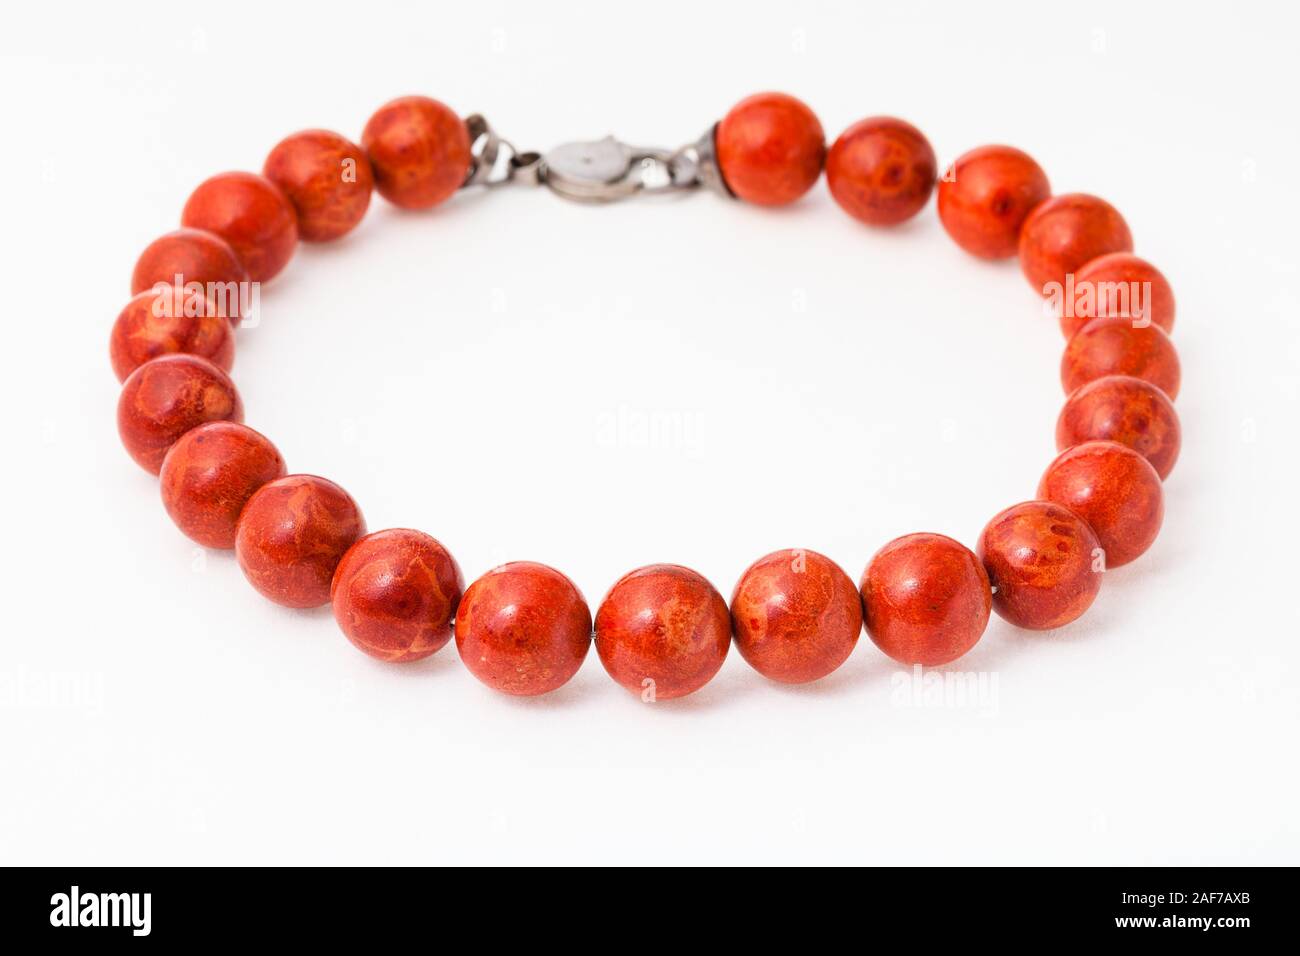 necklace from natural polished red coral balls on white paper background Stock Photo